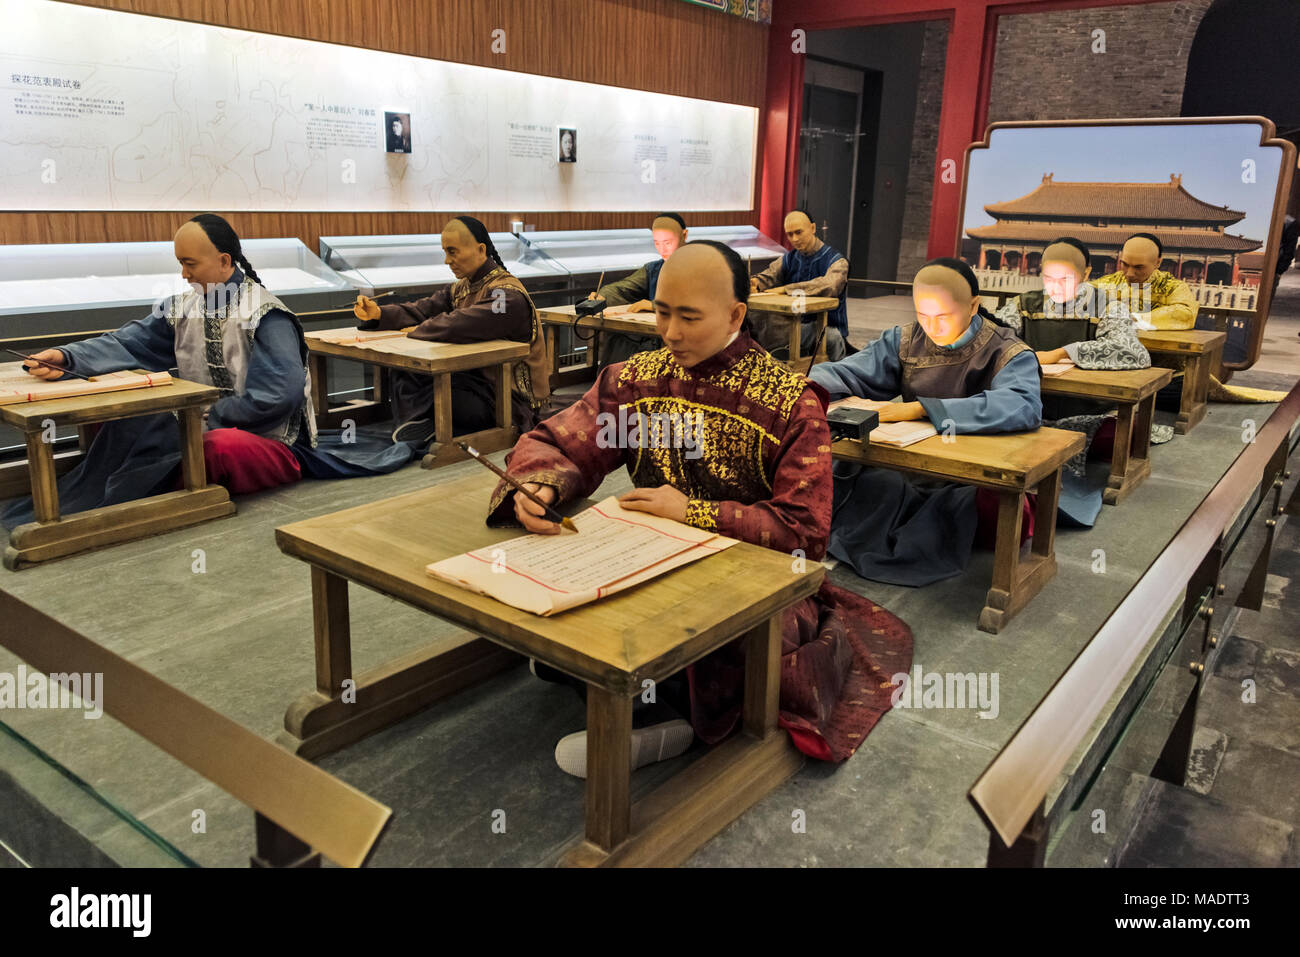 Display showing students taking the Imperal Examination druing the Qing Dynasty in Museum of Chinese Imperial Examination, Nanjing, Jiangsu Province,  Stock Photo